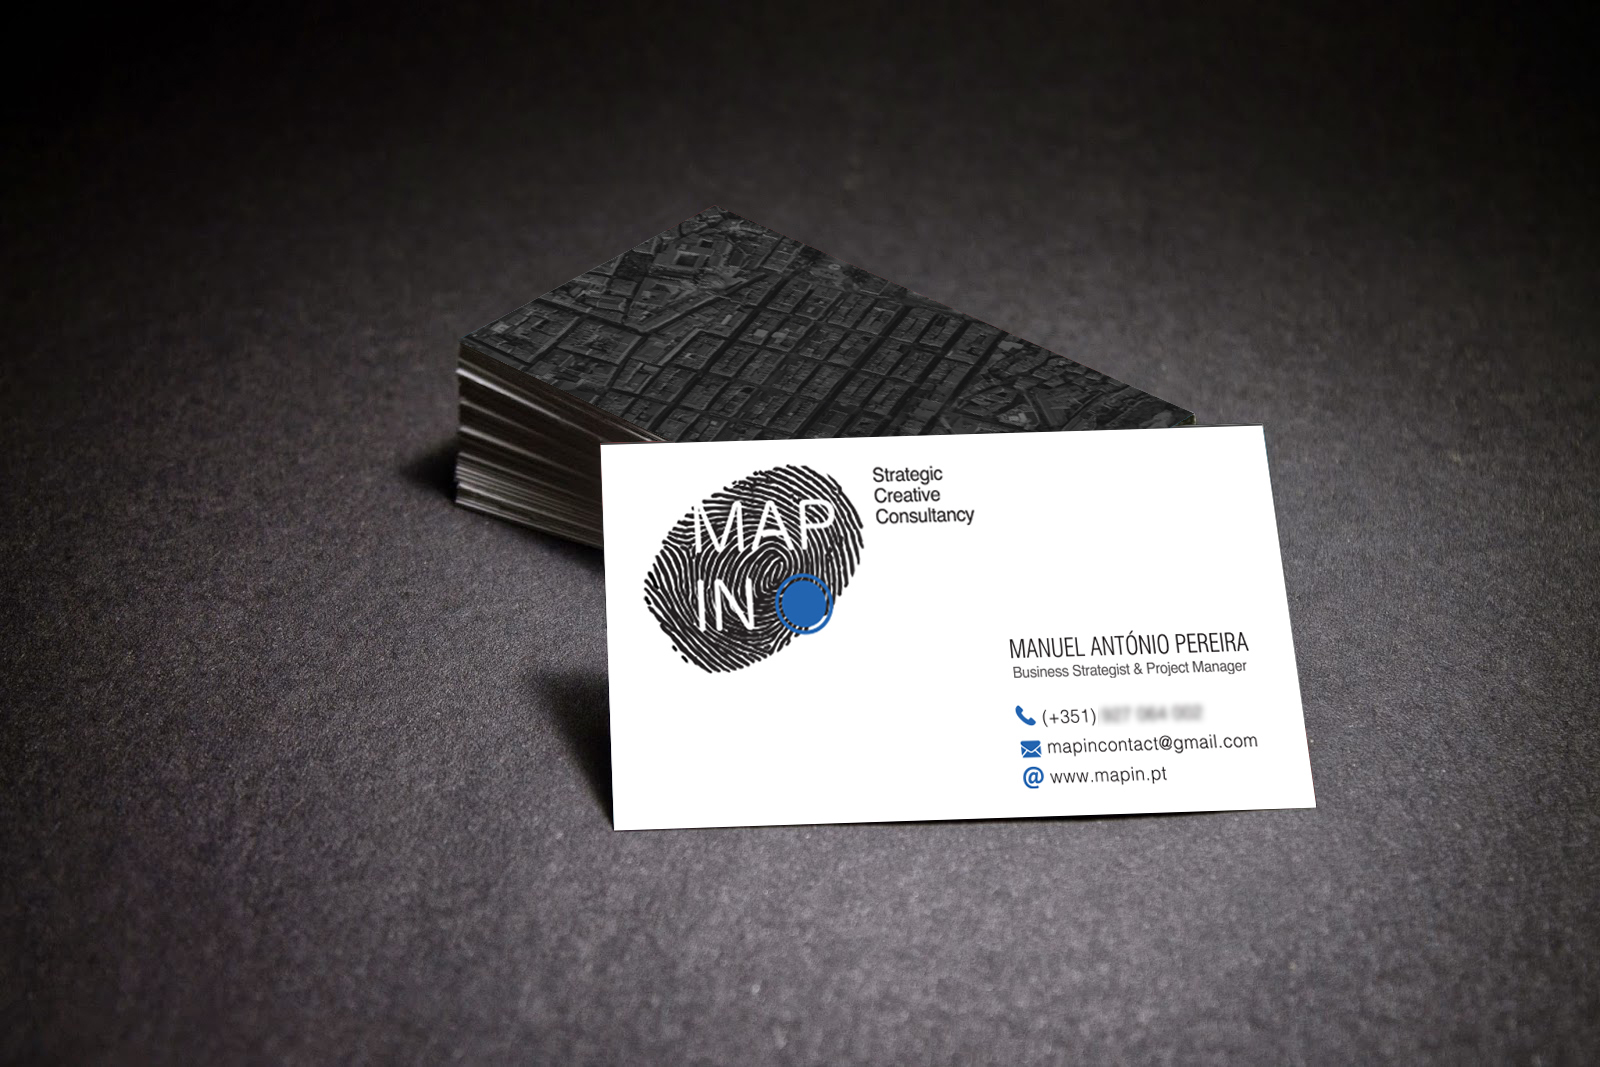 MAP IN Business card